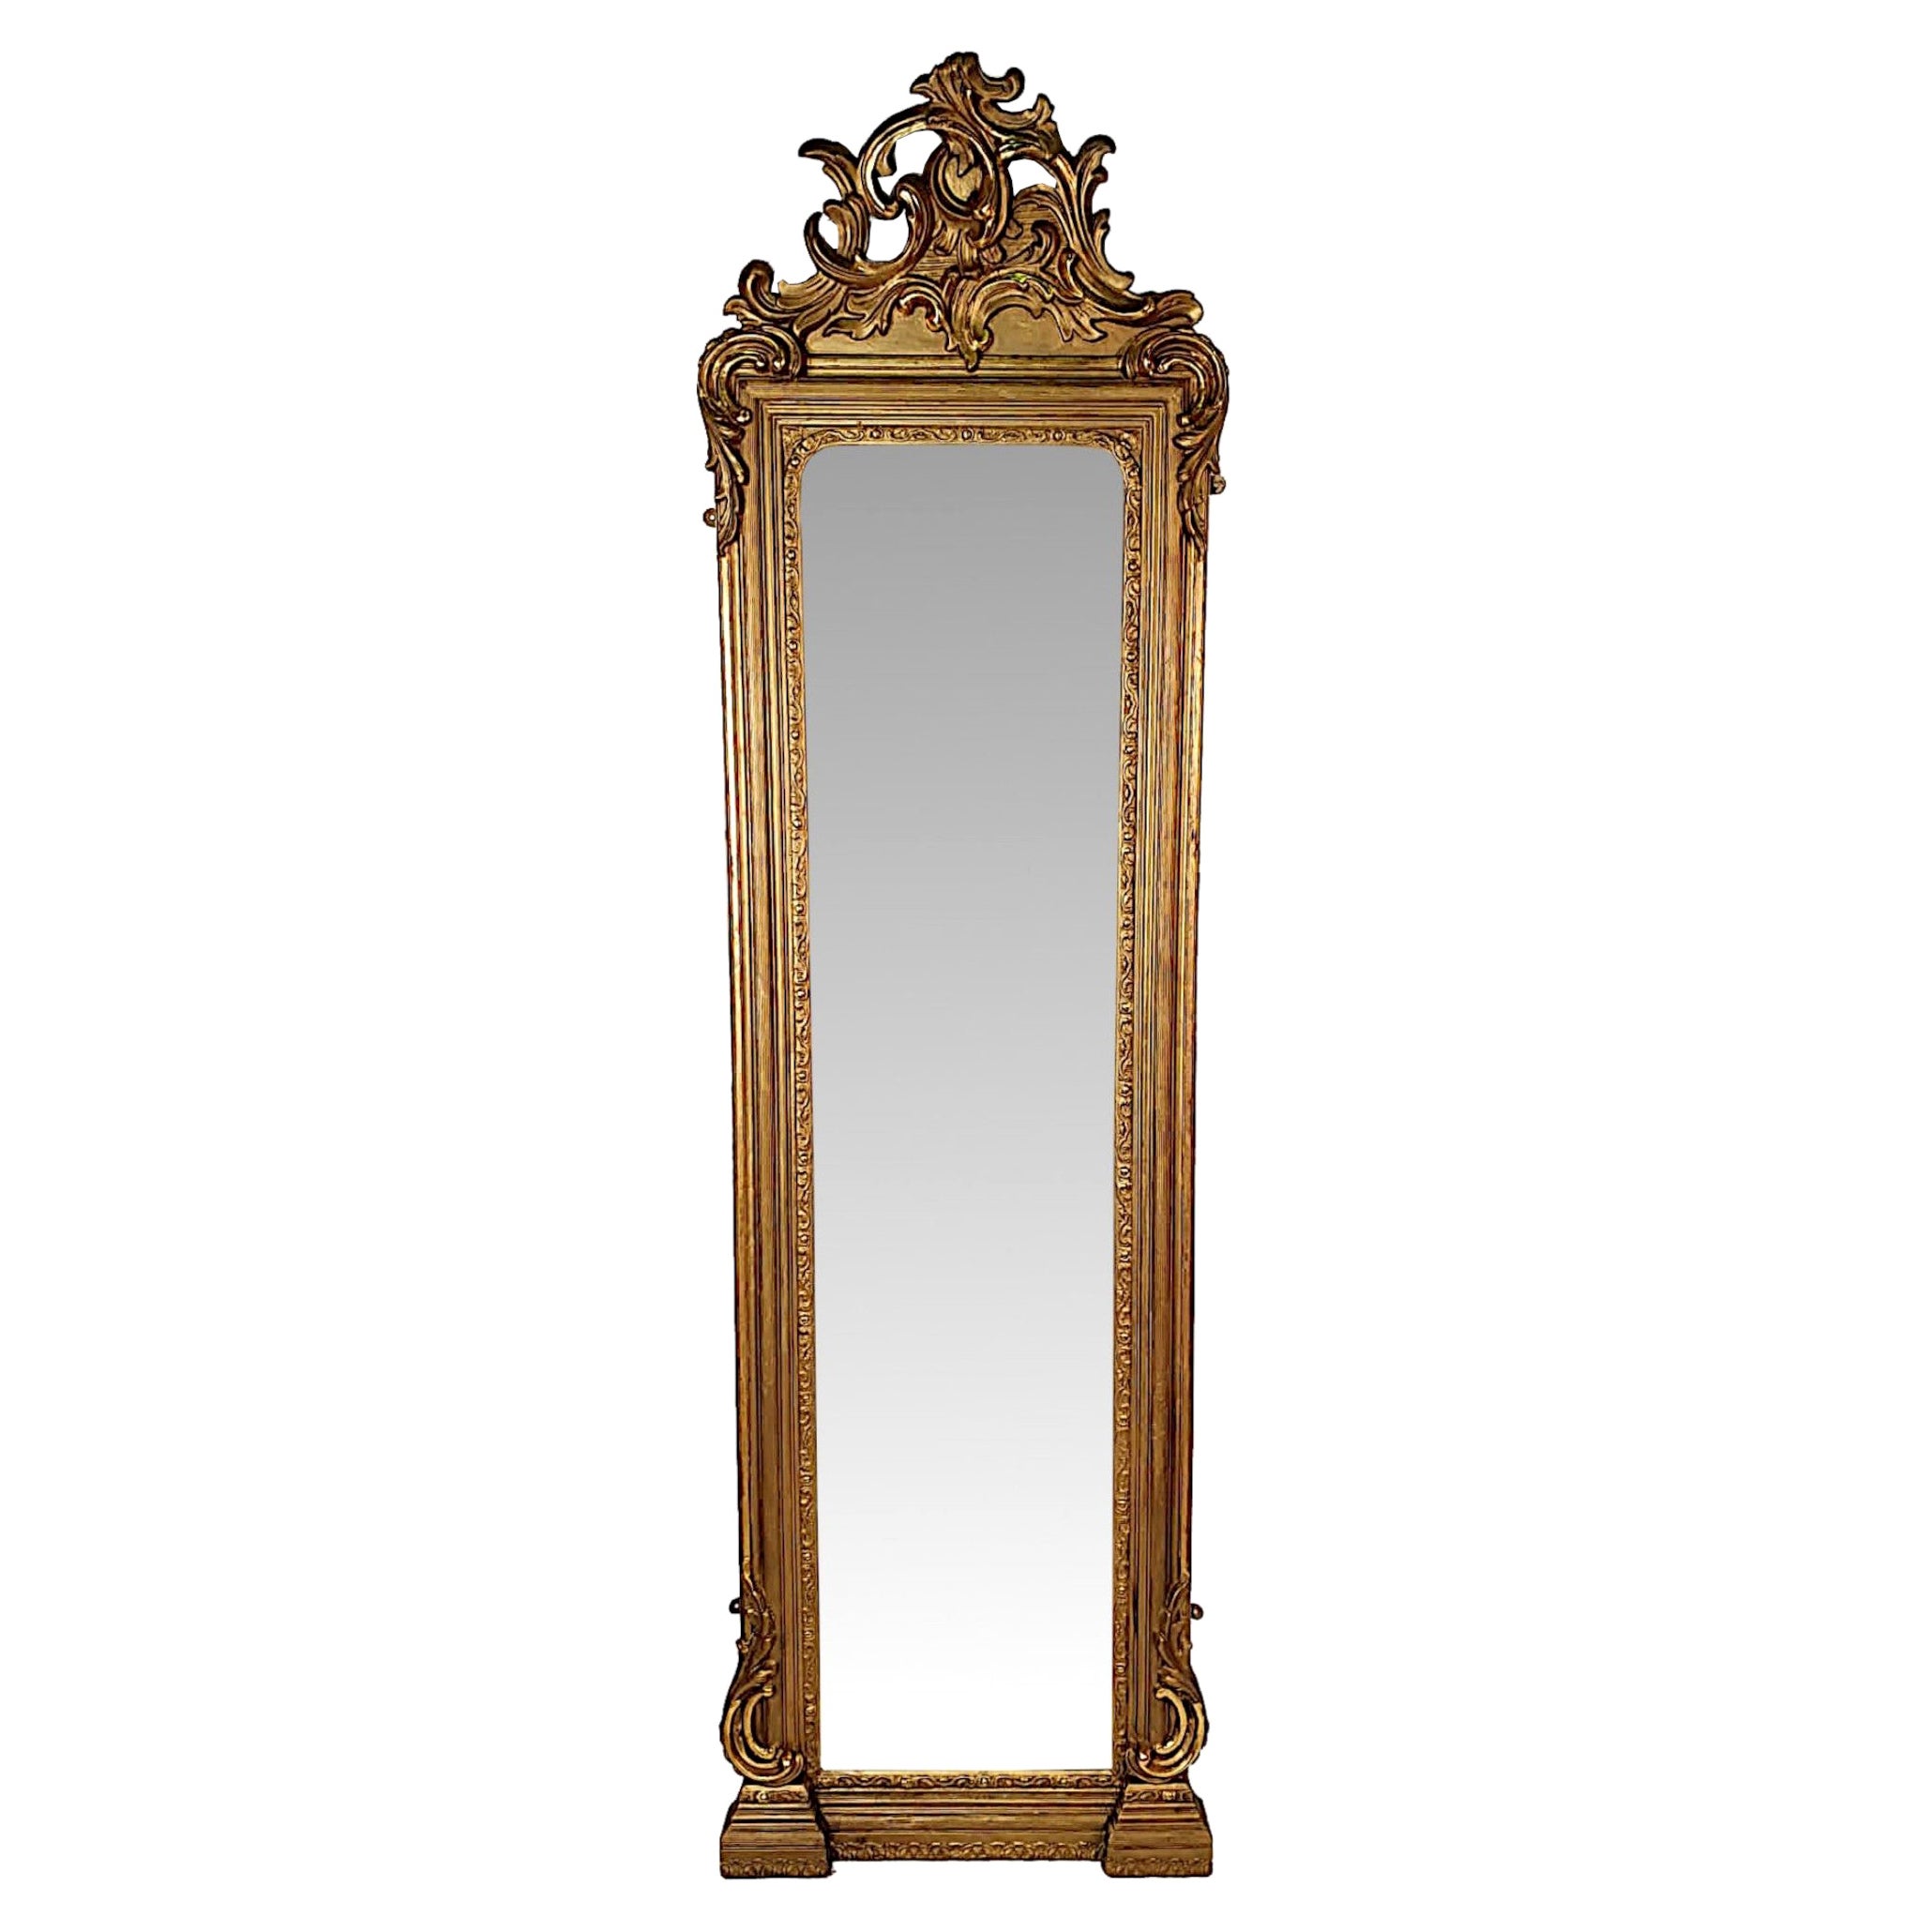 Very Fine and Rare 19th Century Giltwood Pier or Dressing Mirror